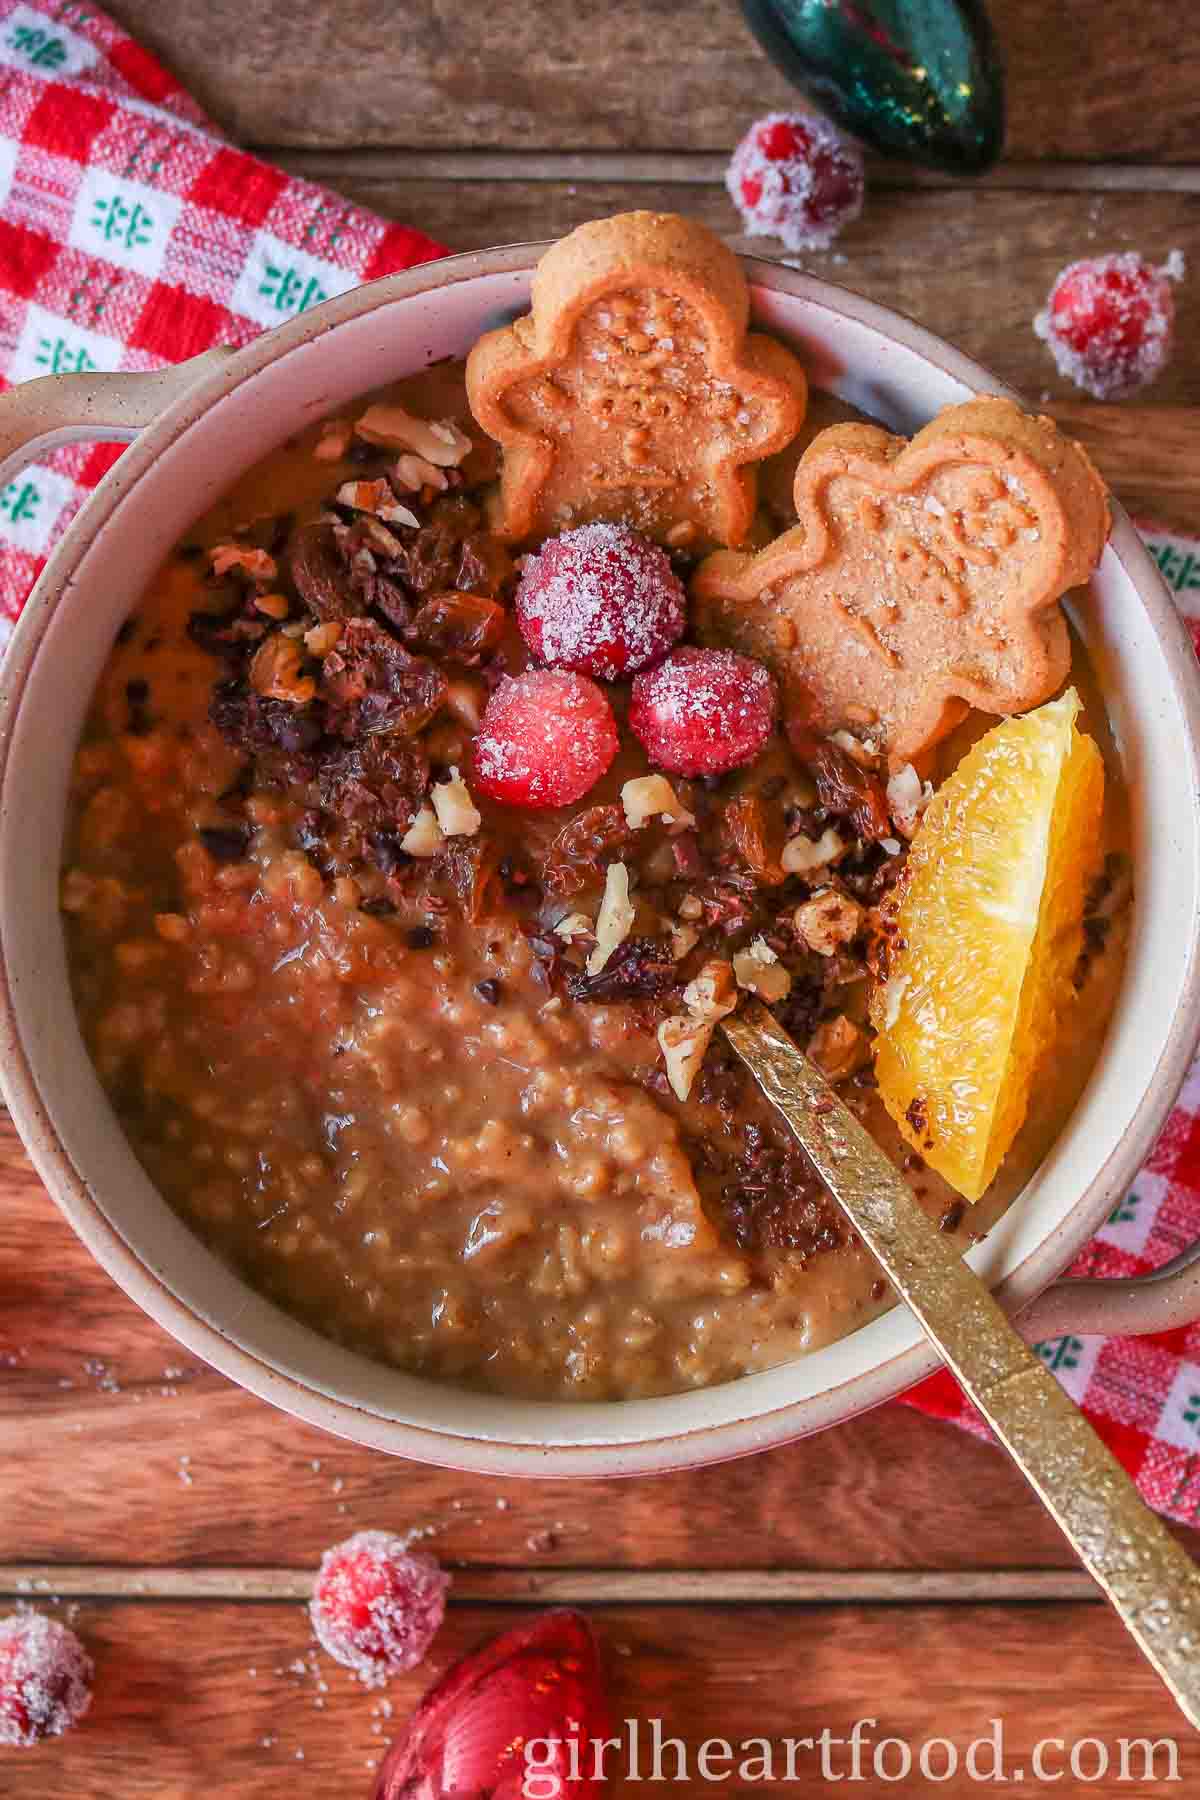 Bowl of gingerbread steel-cut oats garnished with festive toppings.
